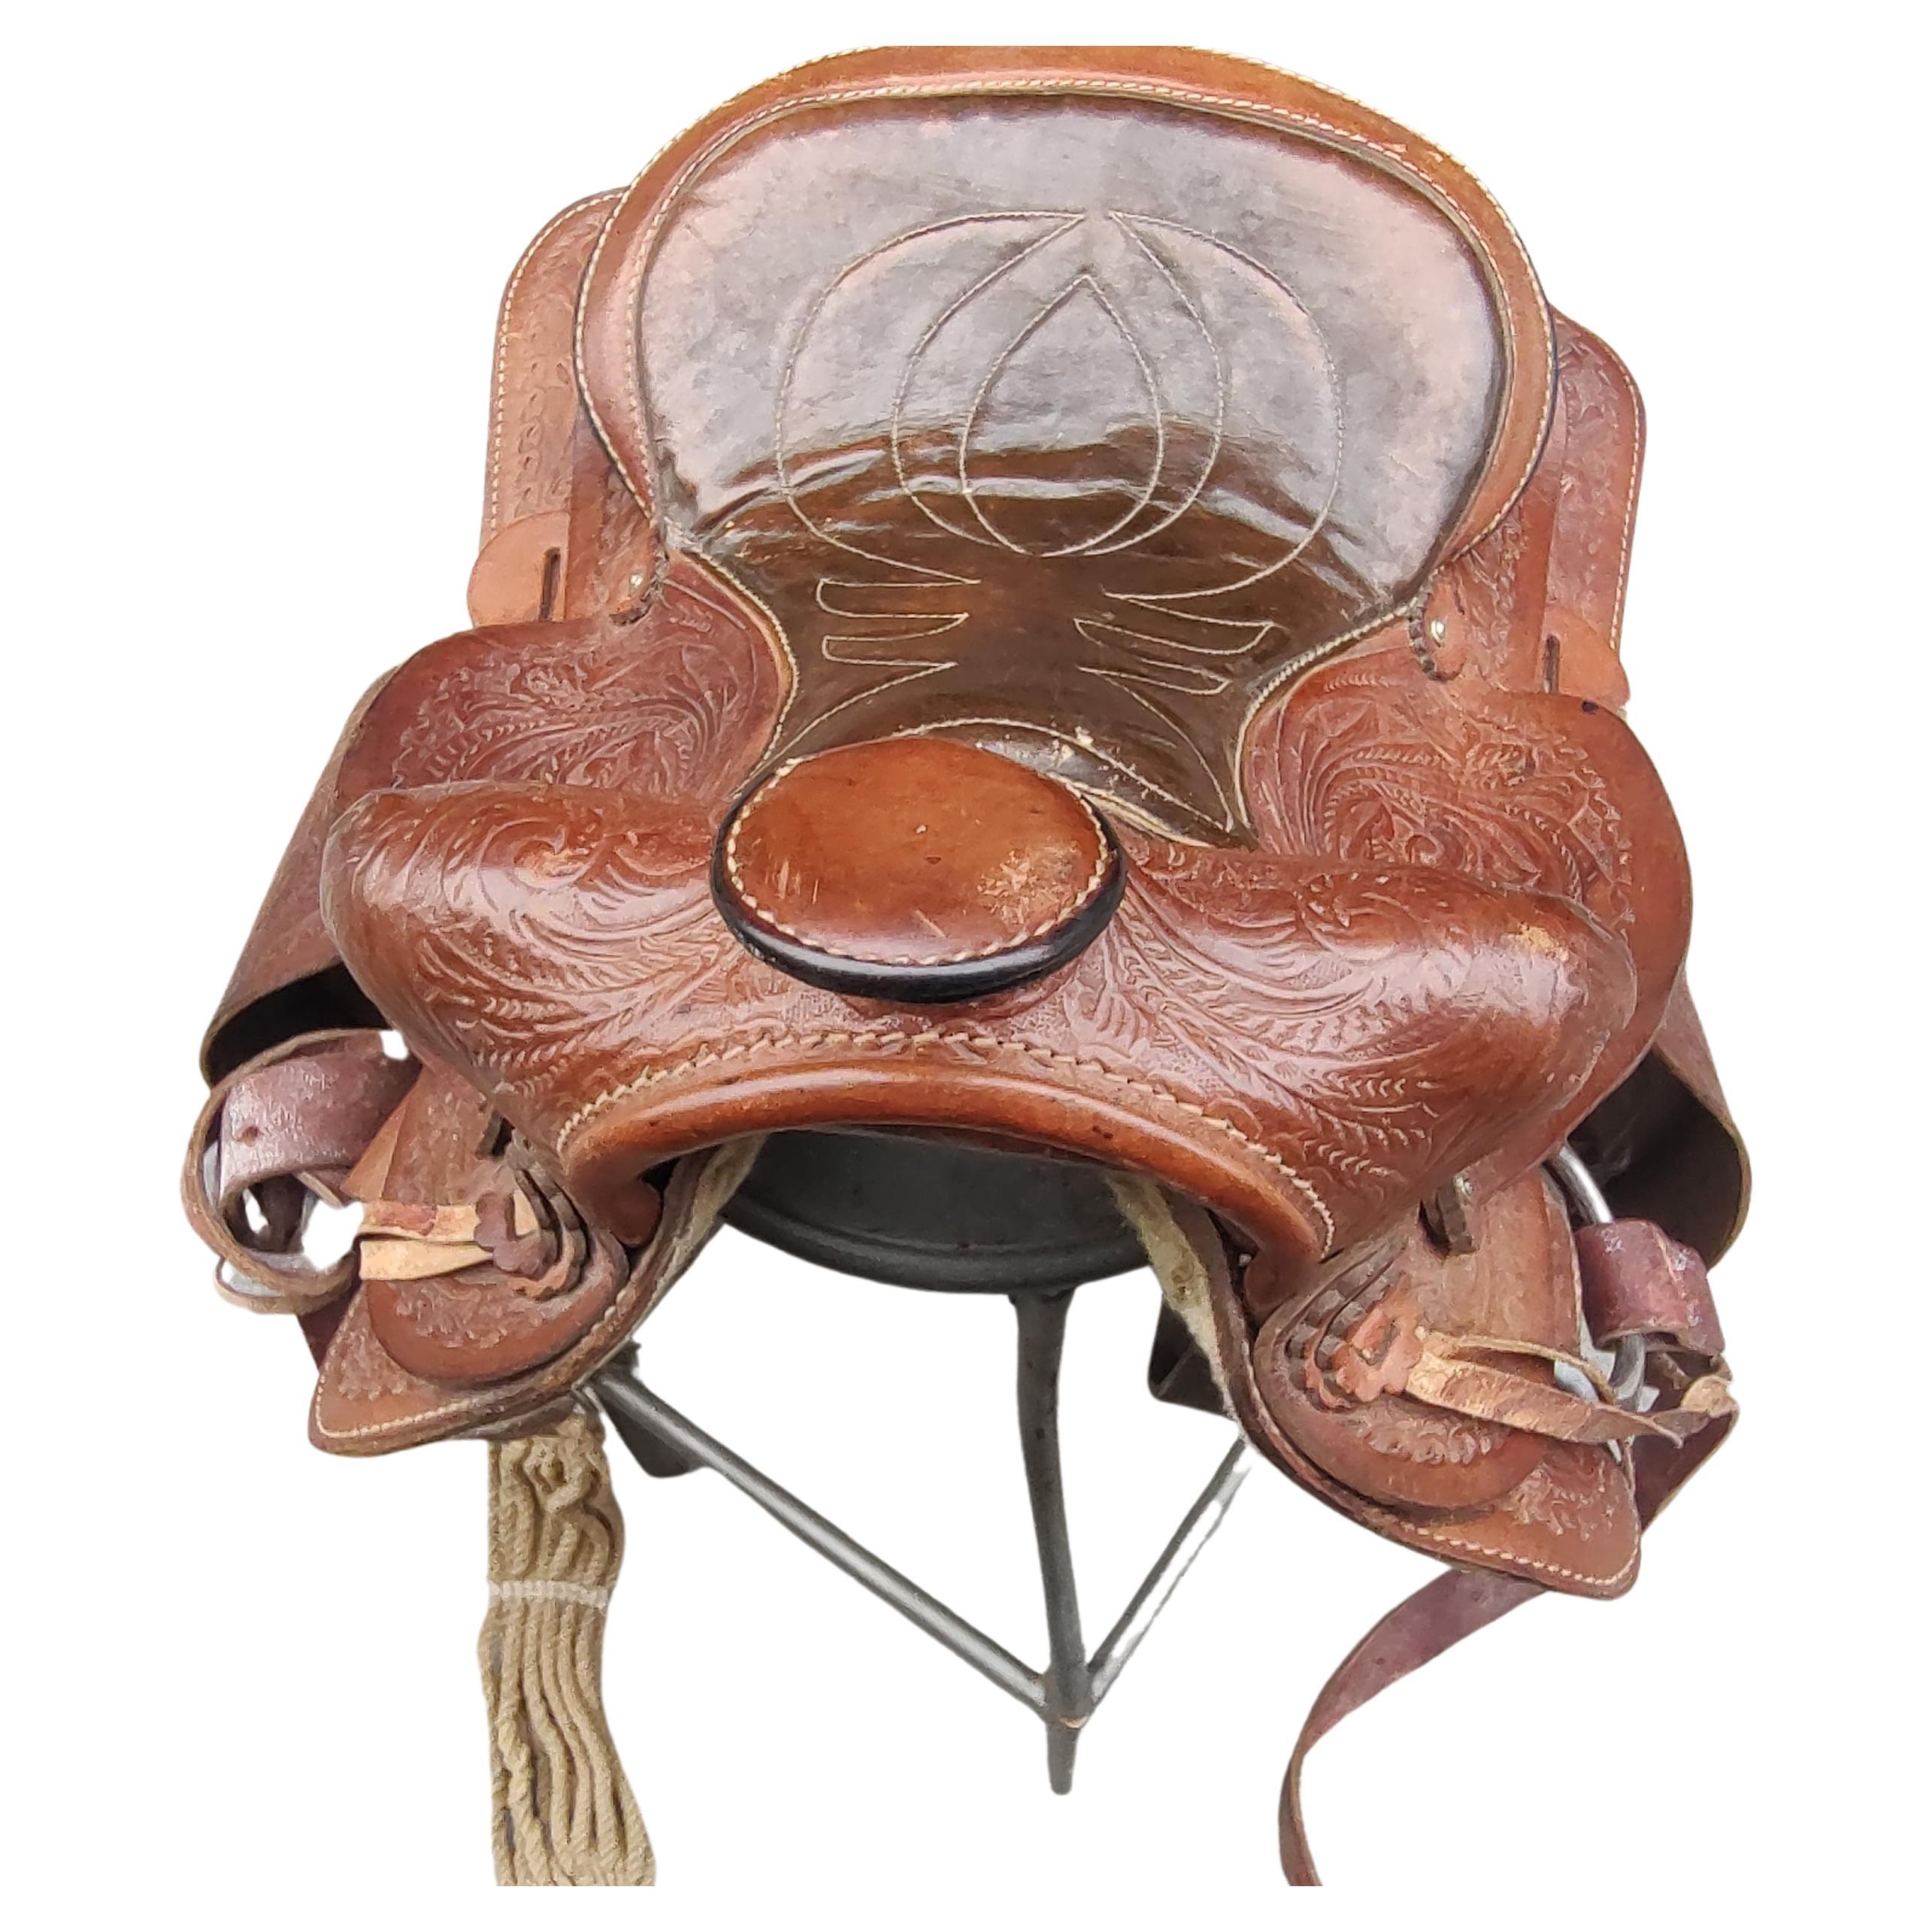 Well tooled and embossed leather western riding saddle. Possibly a junior size. In excellent vintage condition with minimal wear. 